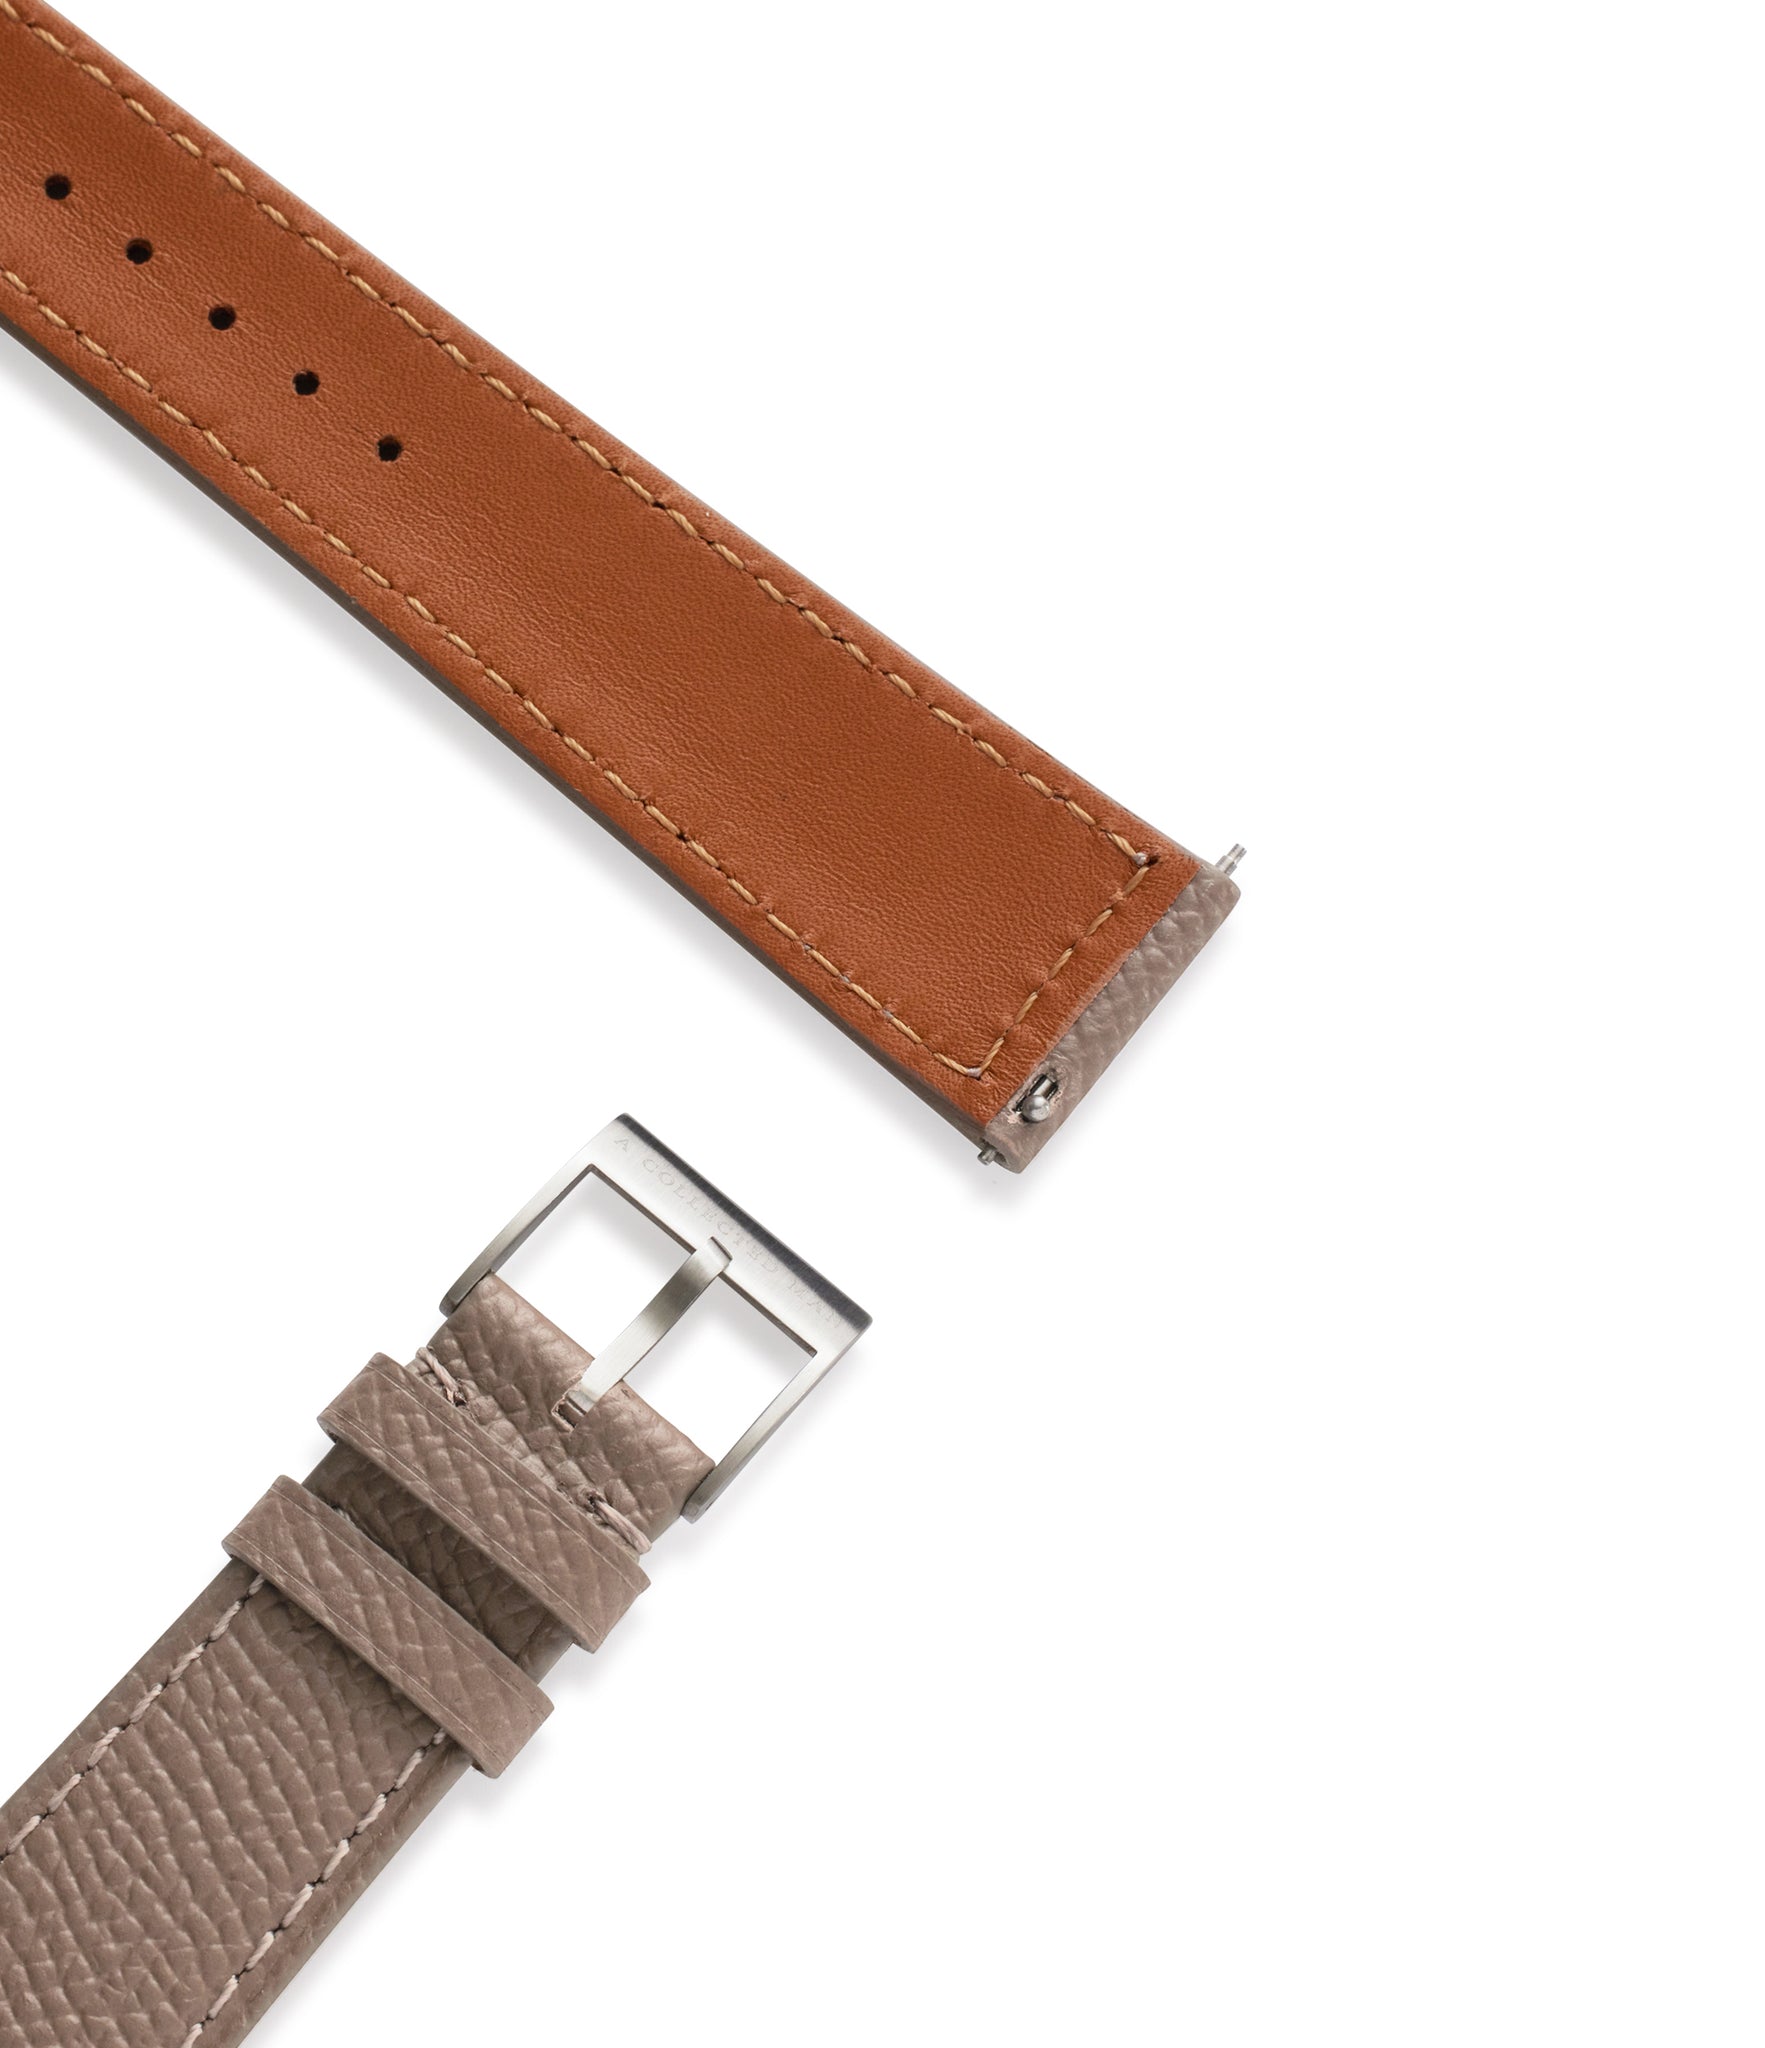 Buy grained leather quality watch strap in truffle taupe taupe from A Collected Man London, in short or regular lengths. We are proud to offer these hand-crafted watch straps, thoughtfully made in Europe, to suit your watch. Available to order online for worldwide delivery.